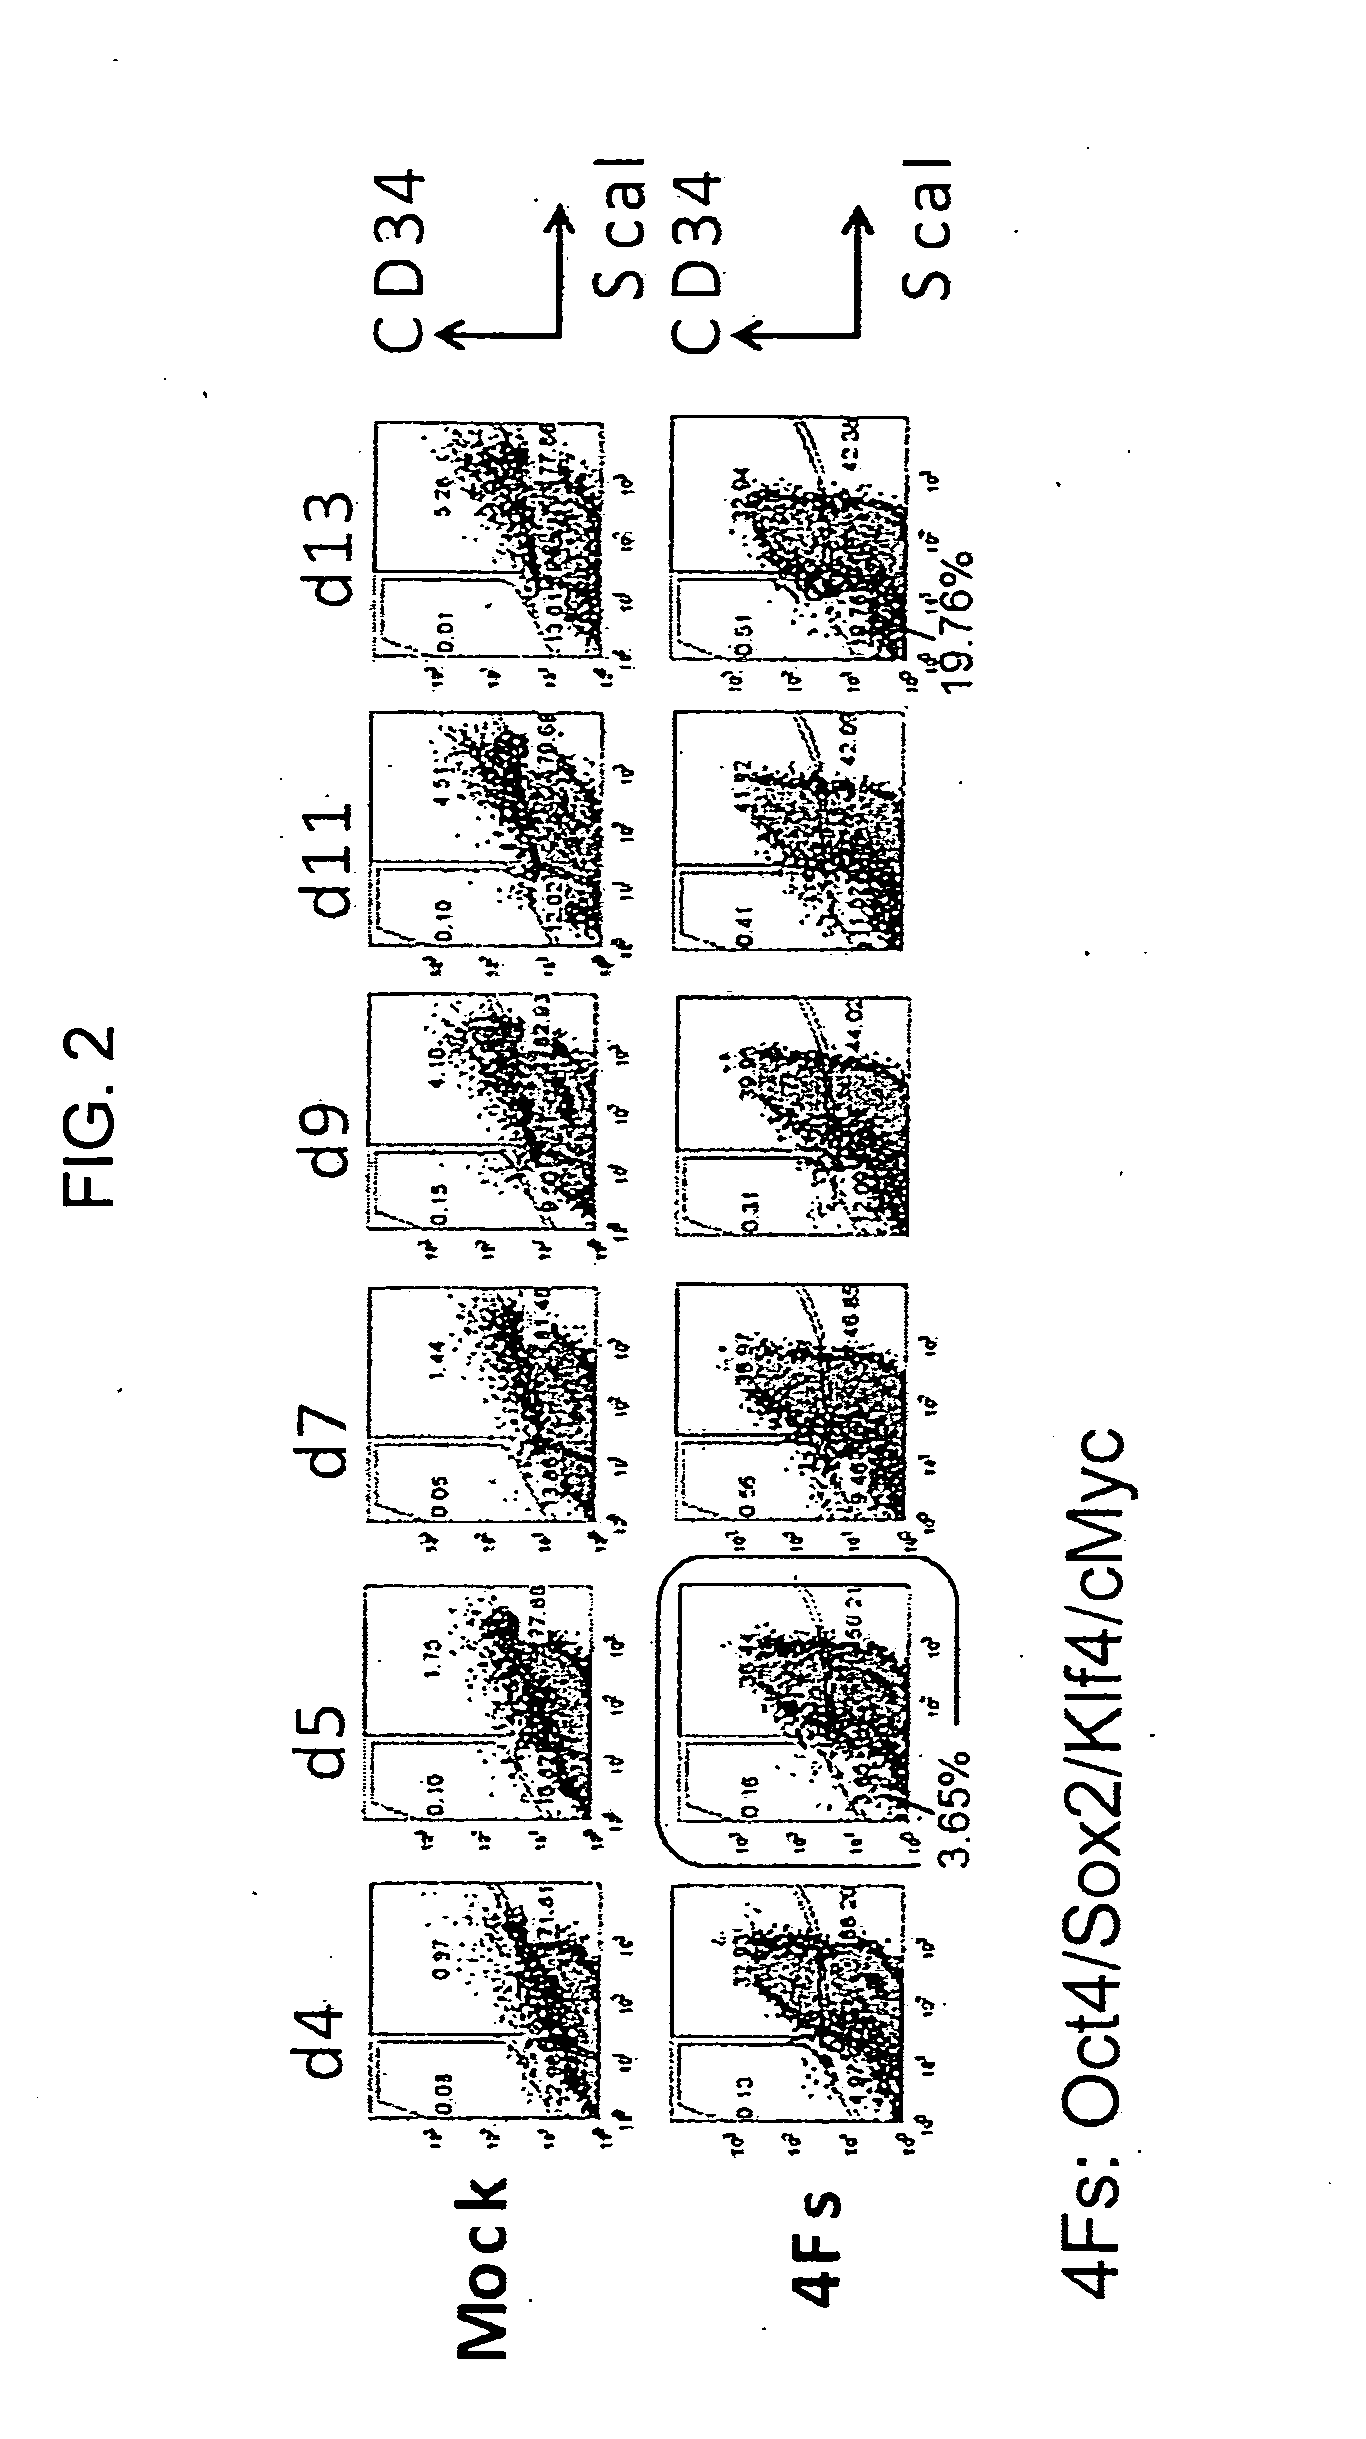 Method for producing induced pluripotent stem cells, cardiomyocytes or precursor cells thereof